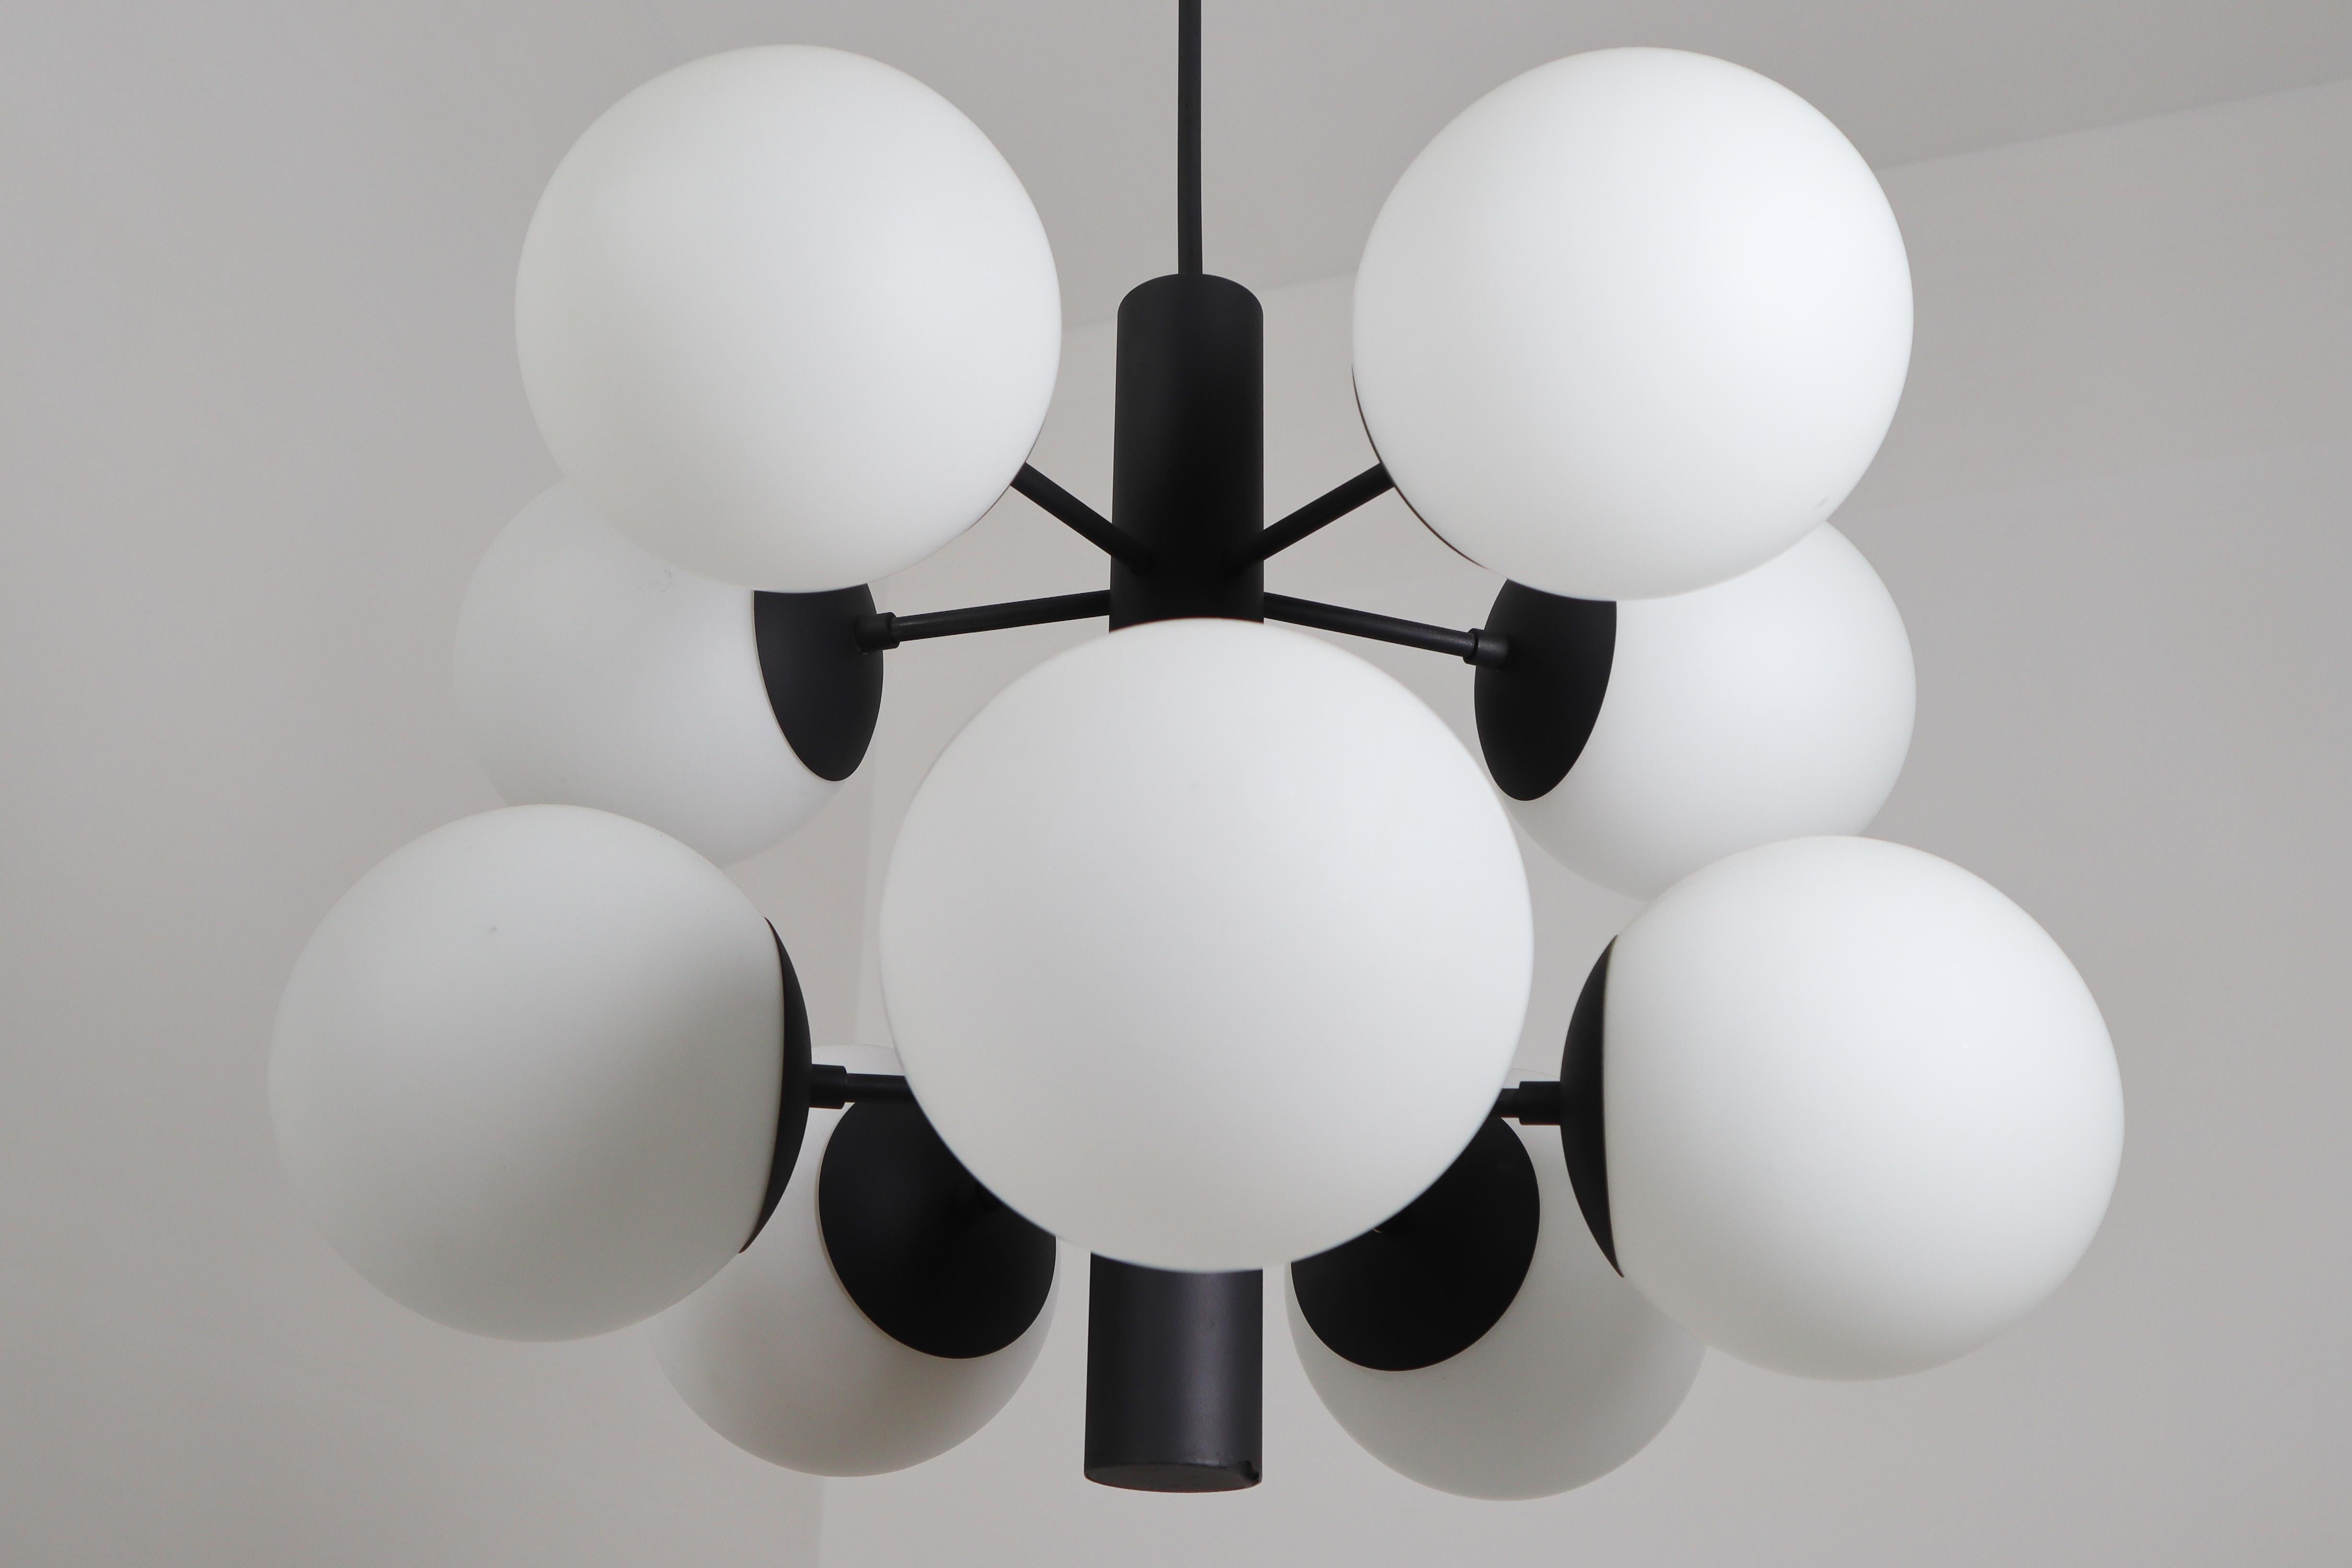 These fantastic midcentury molecular structure chandeliers was designed in Germany 1960s featuring a black coated brass frame and ten hand blown opal glass globes. Ten opaline glass globes are placed over two levels. A warm and diffuse light will